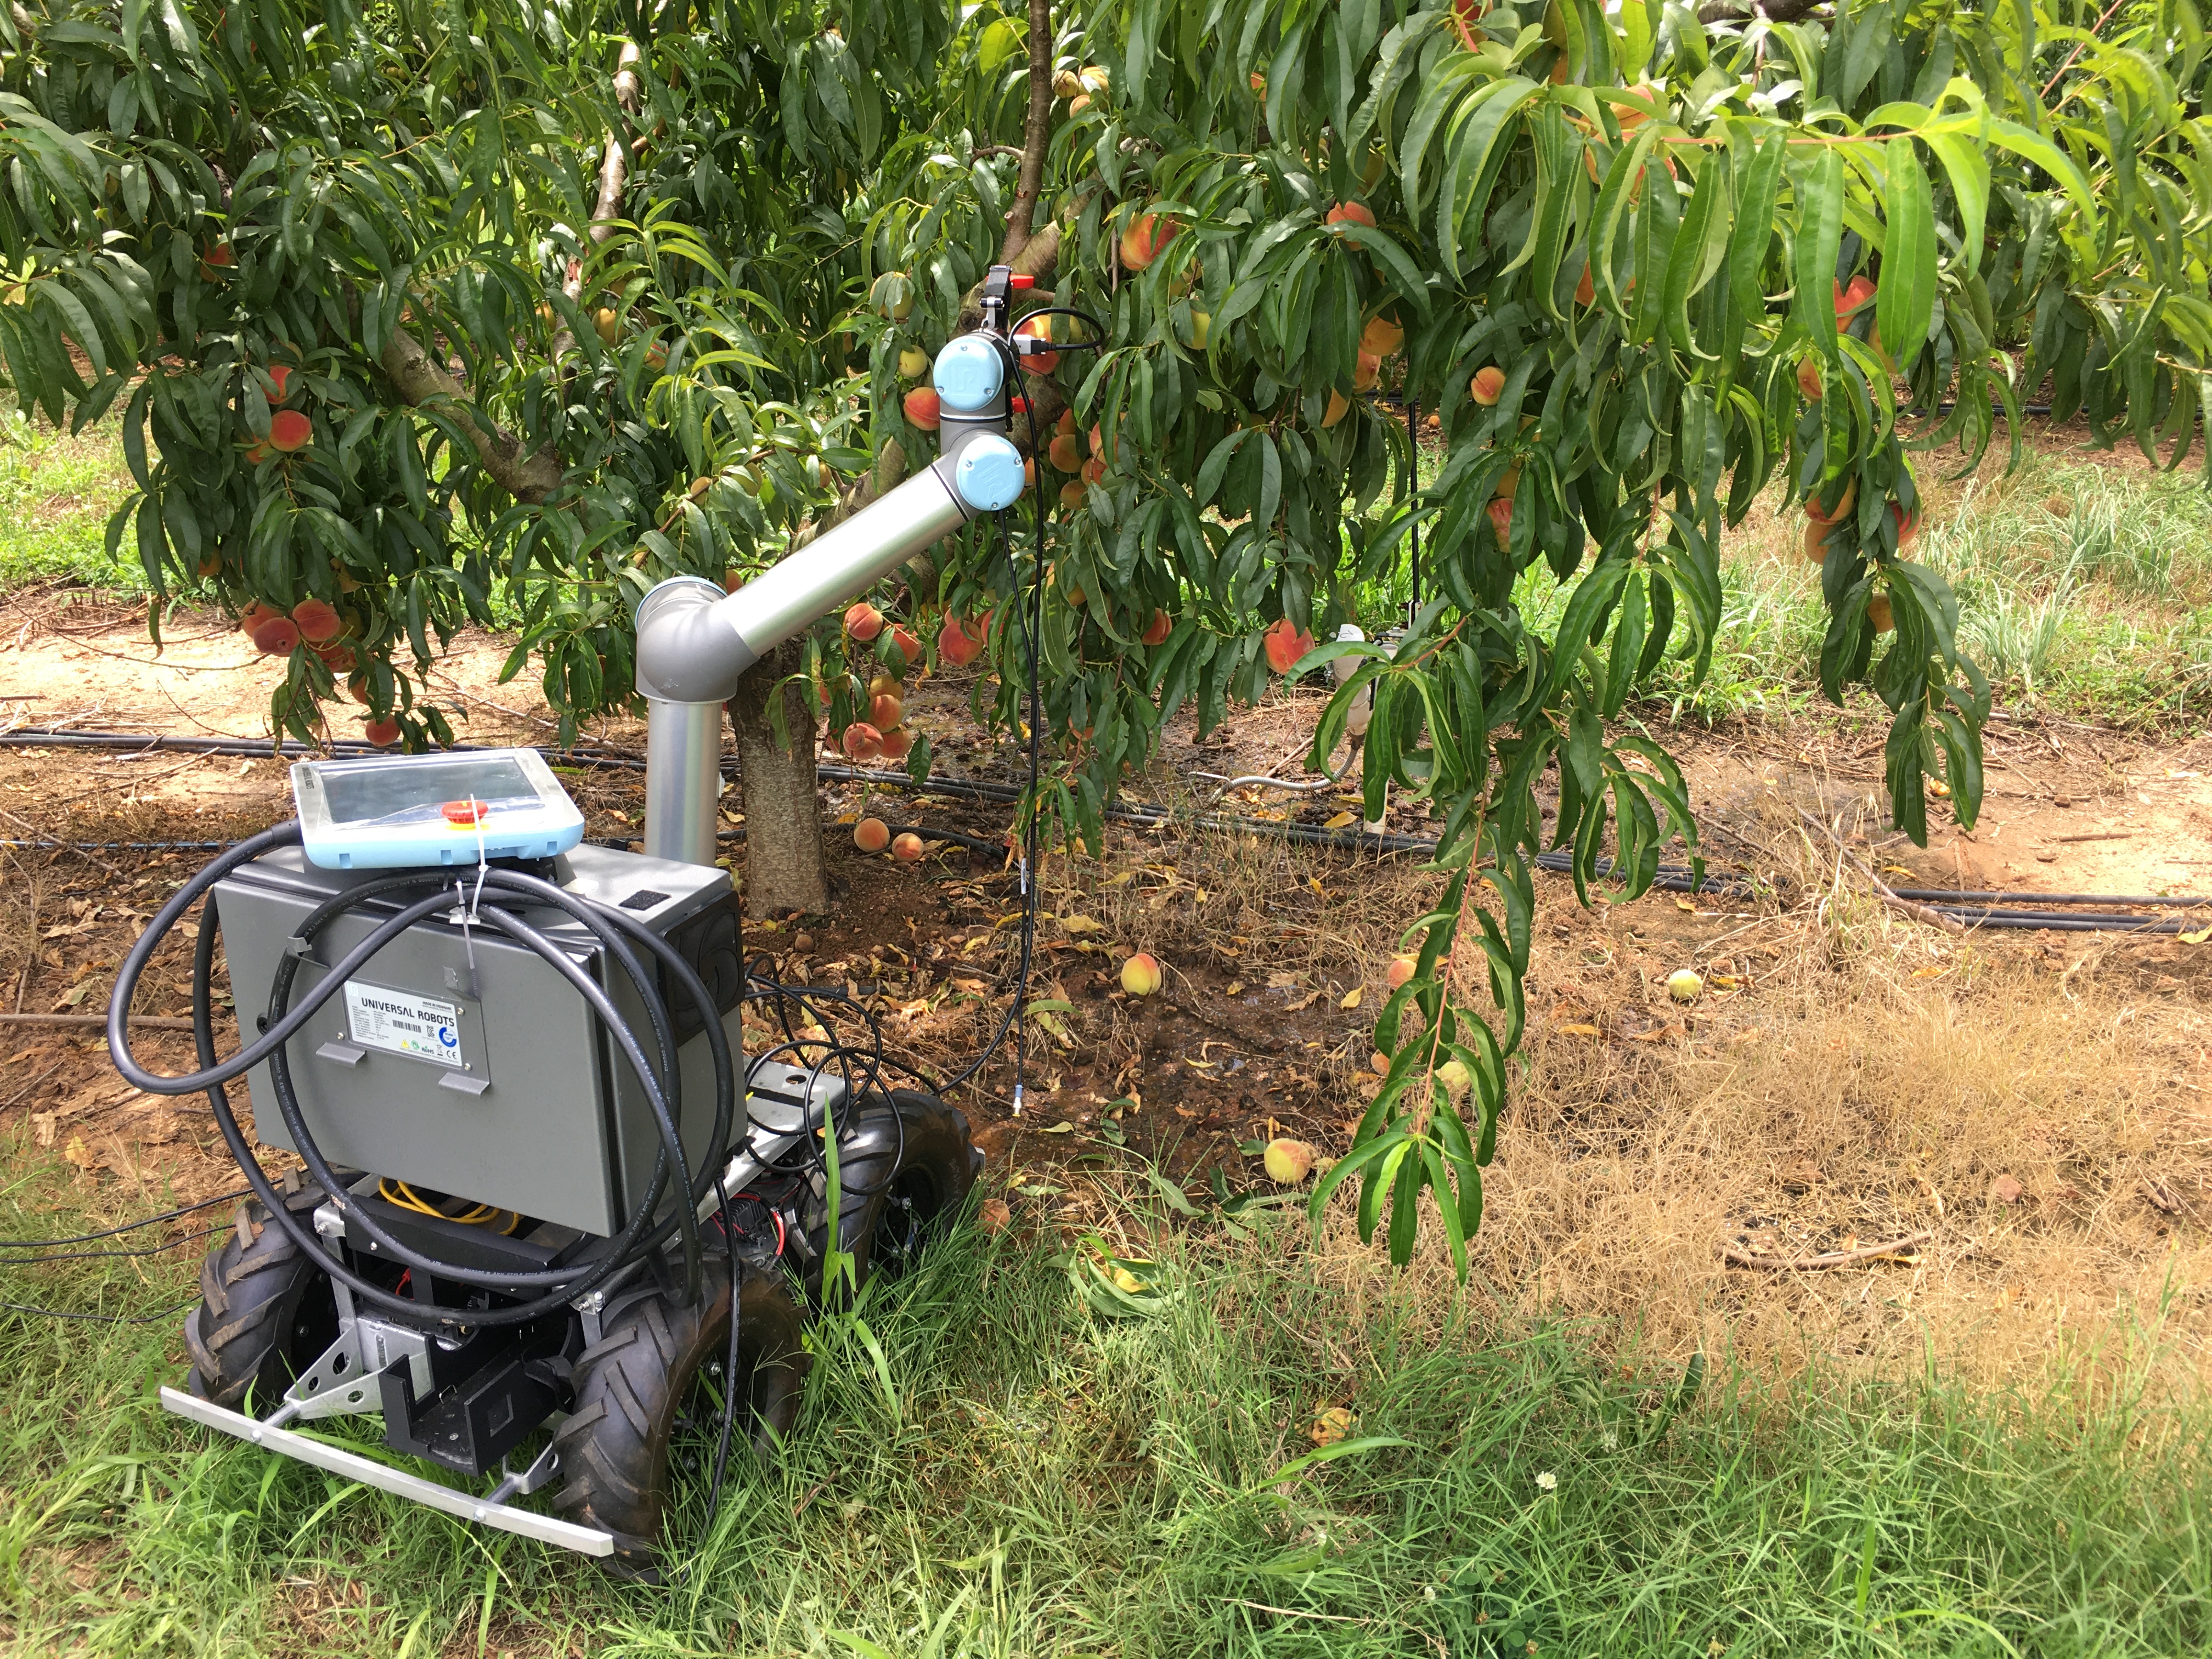 The self-navigating robot uses an embedded 3D camera to determine which peaches need to be pruned or thinned, and removes the peaches using a claw-like device attached to its arm. (Photo credit: Ai-Ping Hu) 